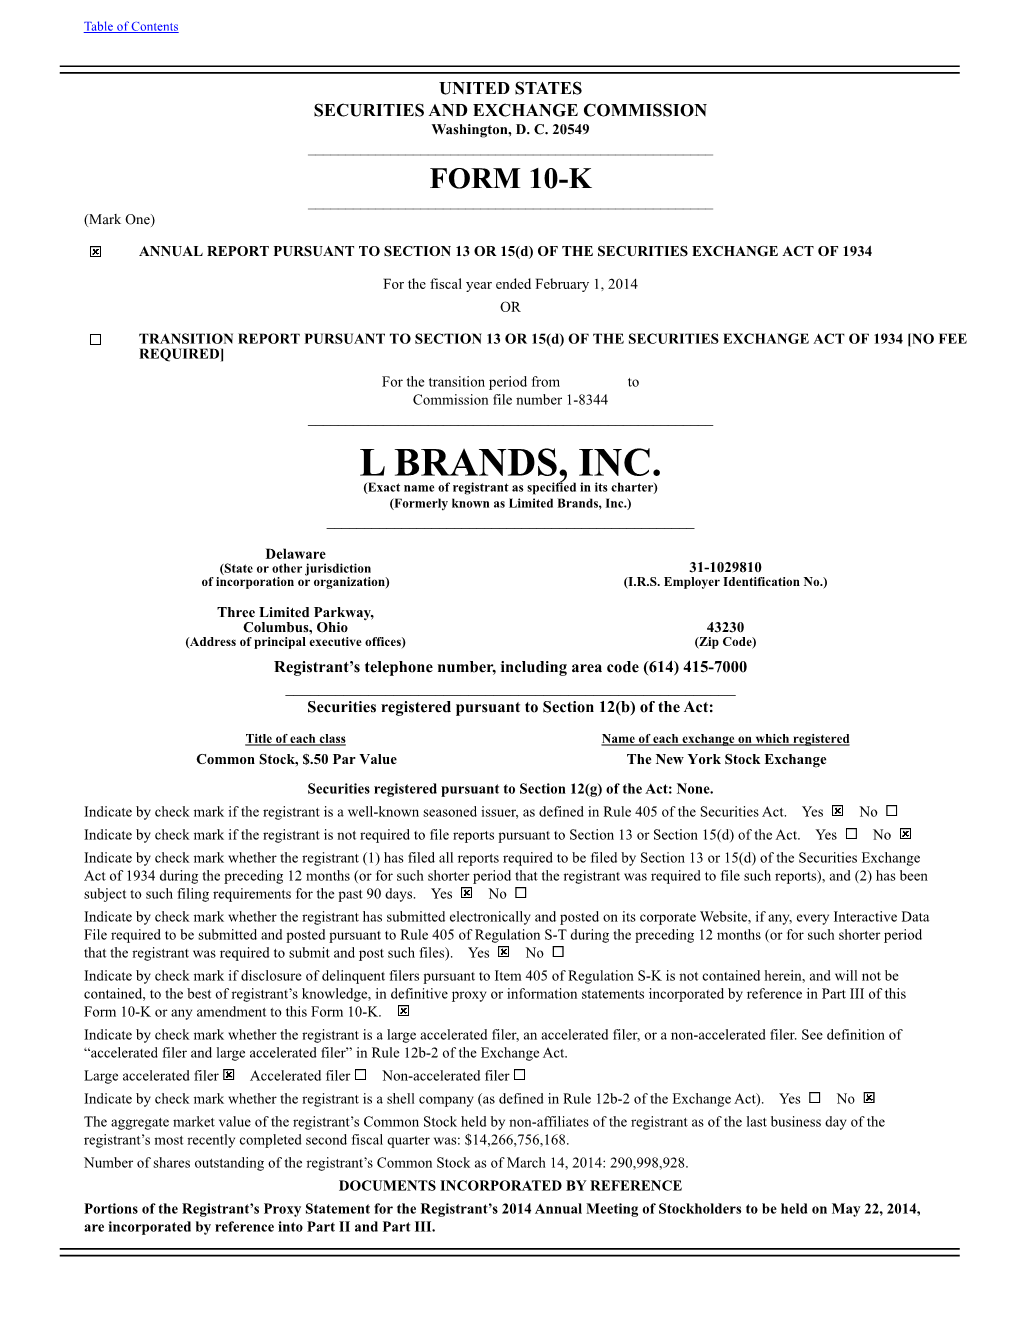 L BRANDS, INC. (Exact Name of Registrant As Specified in Its Charter) (Formerly Known As Limited Brands, Inc.) ______